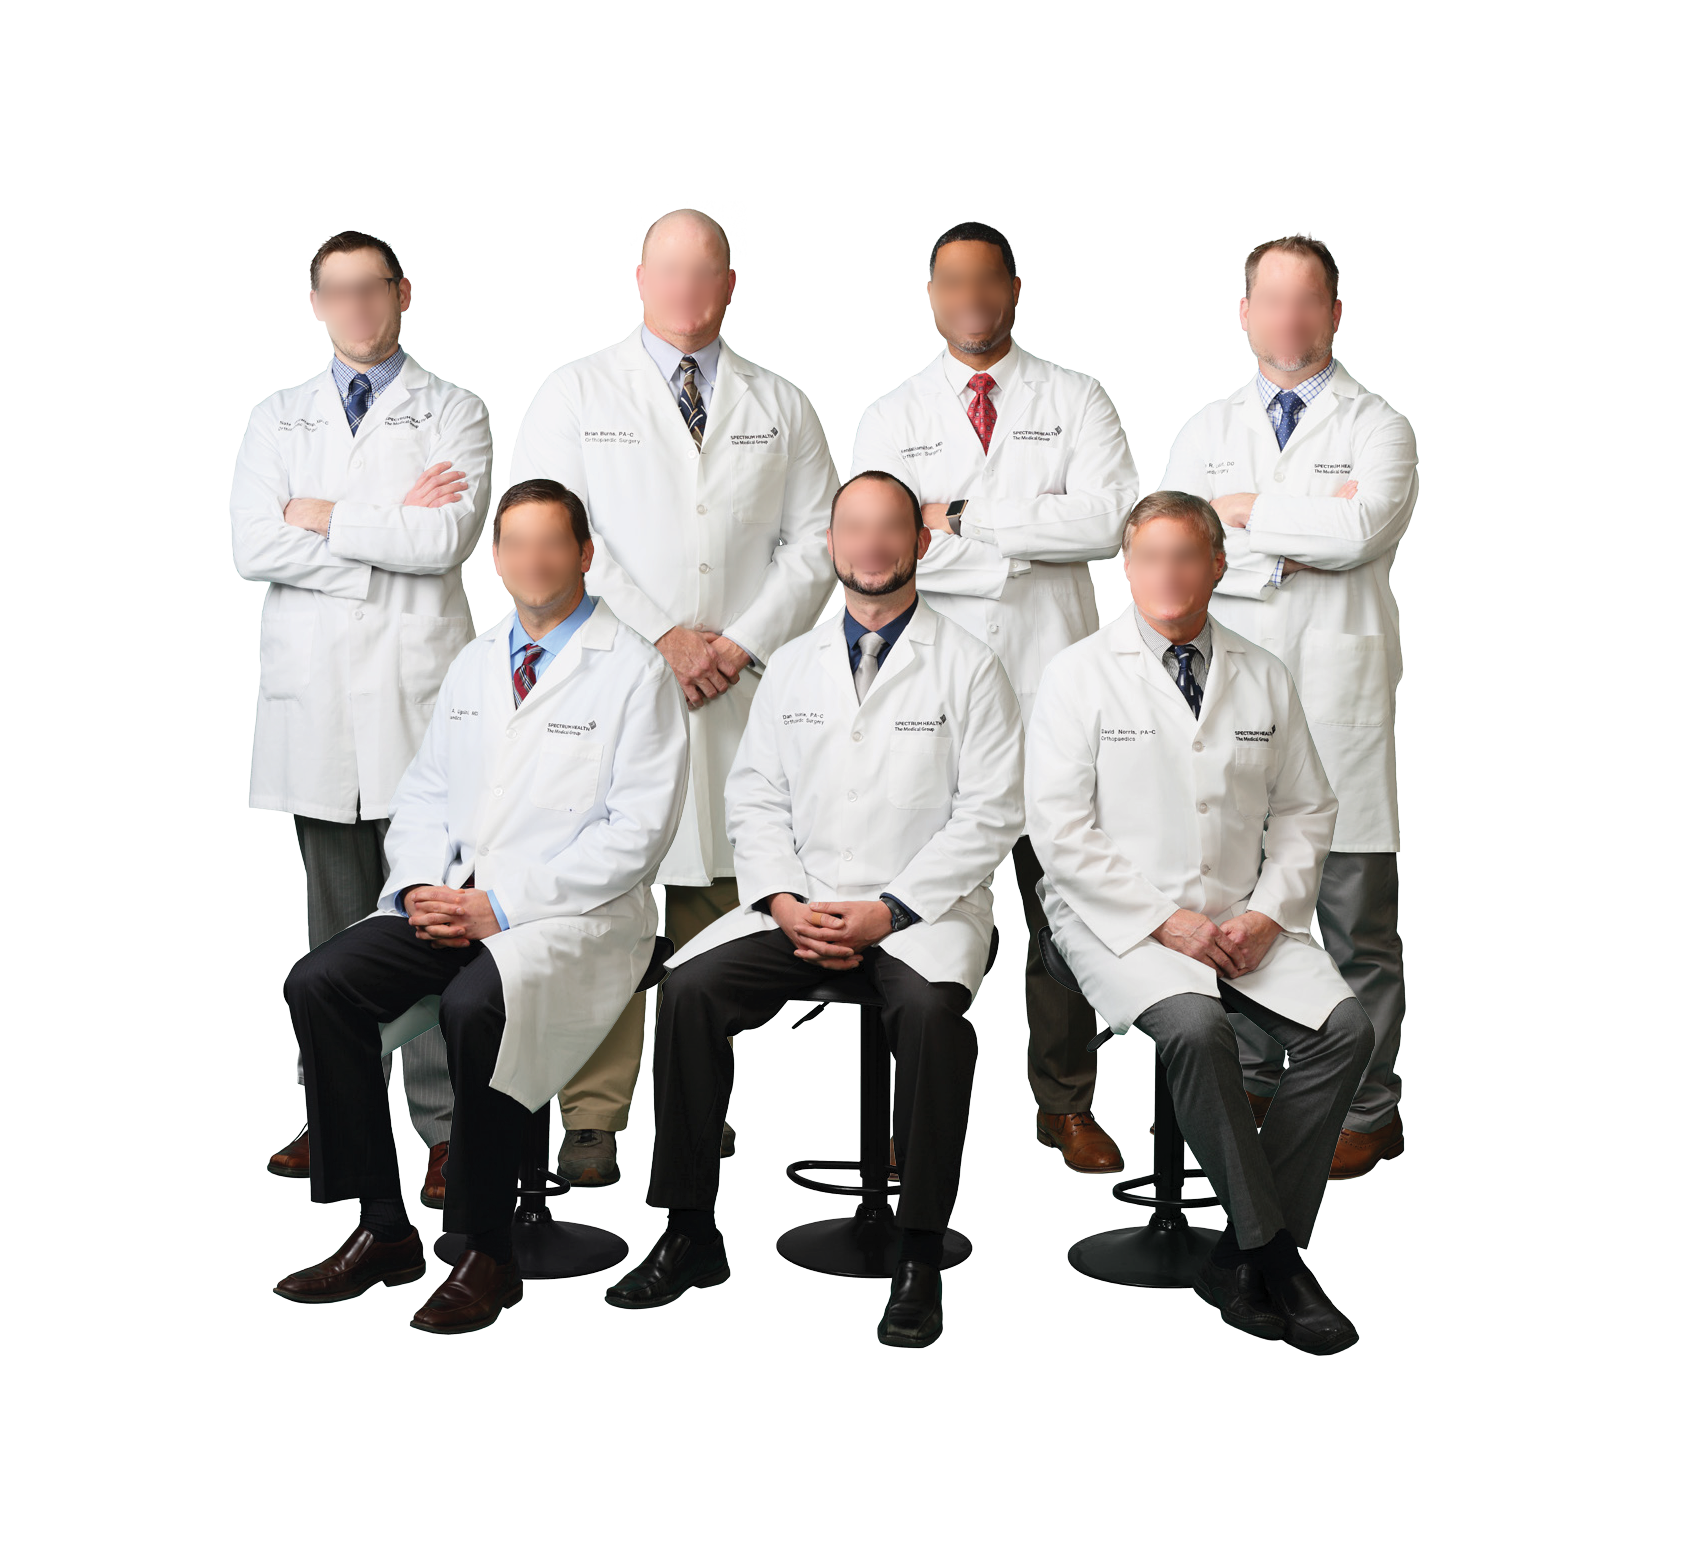 17.52.9.F - Group Images of Orthopedics Teams - Without Names-4.png